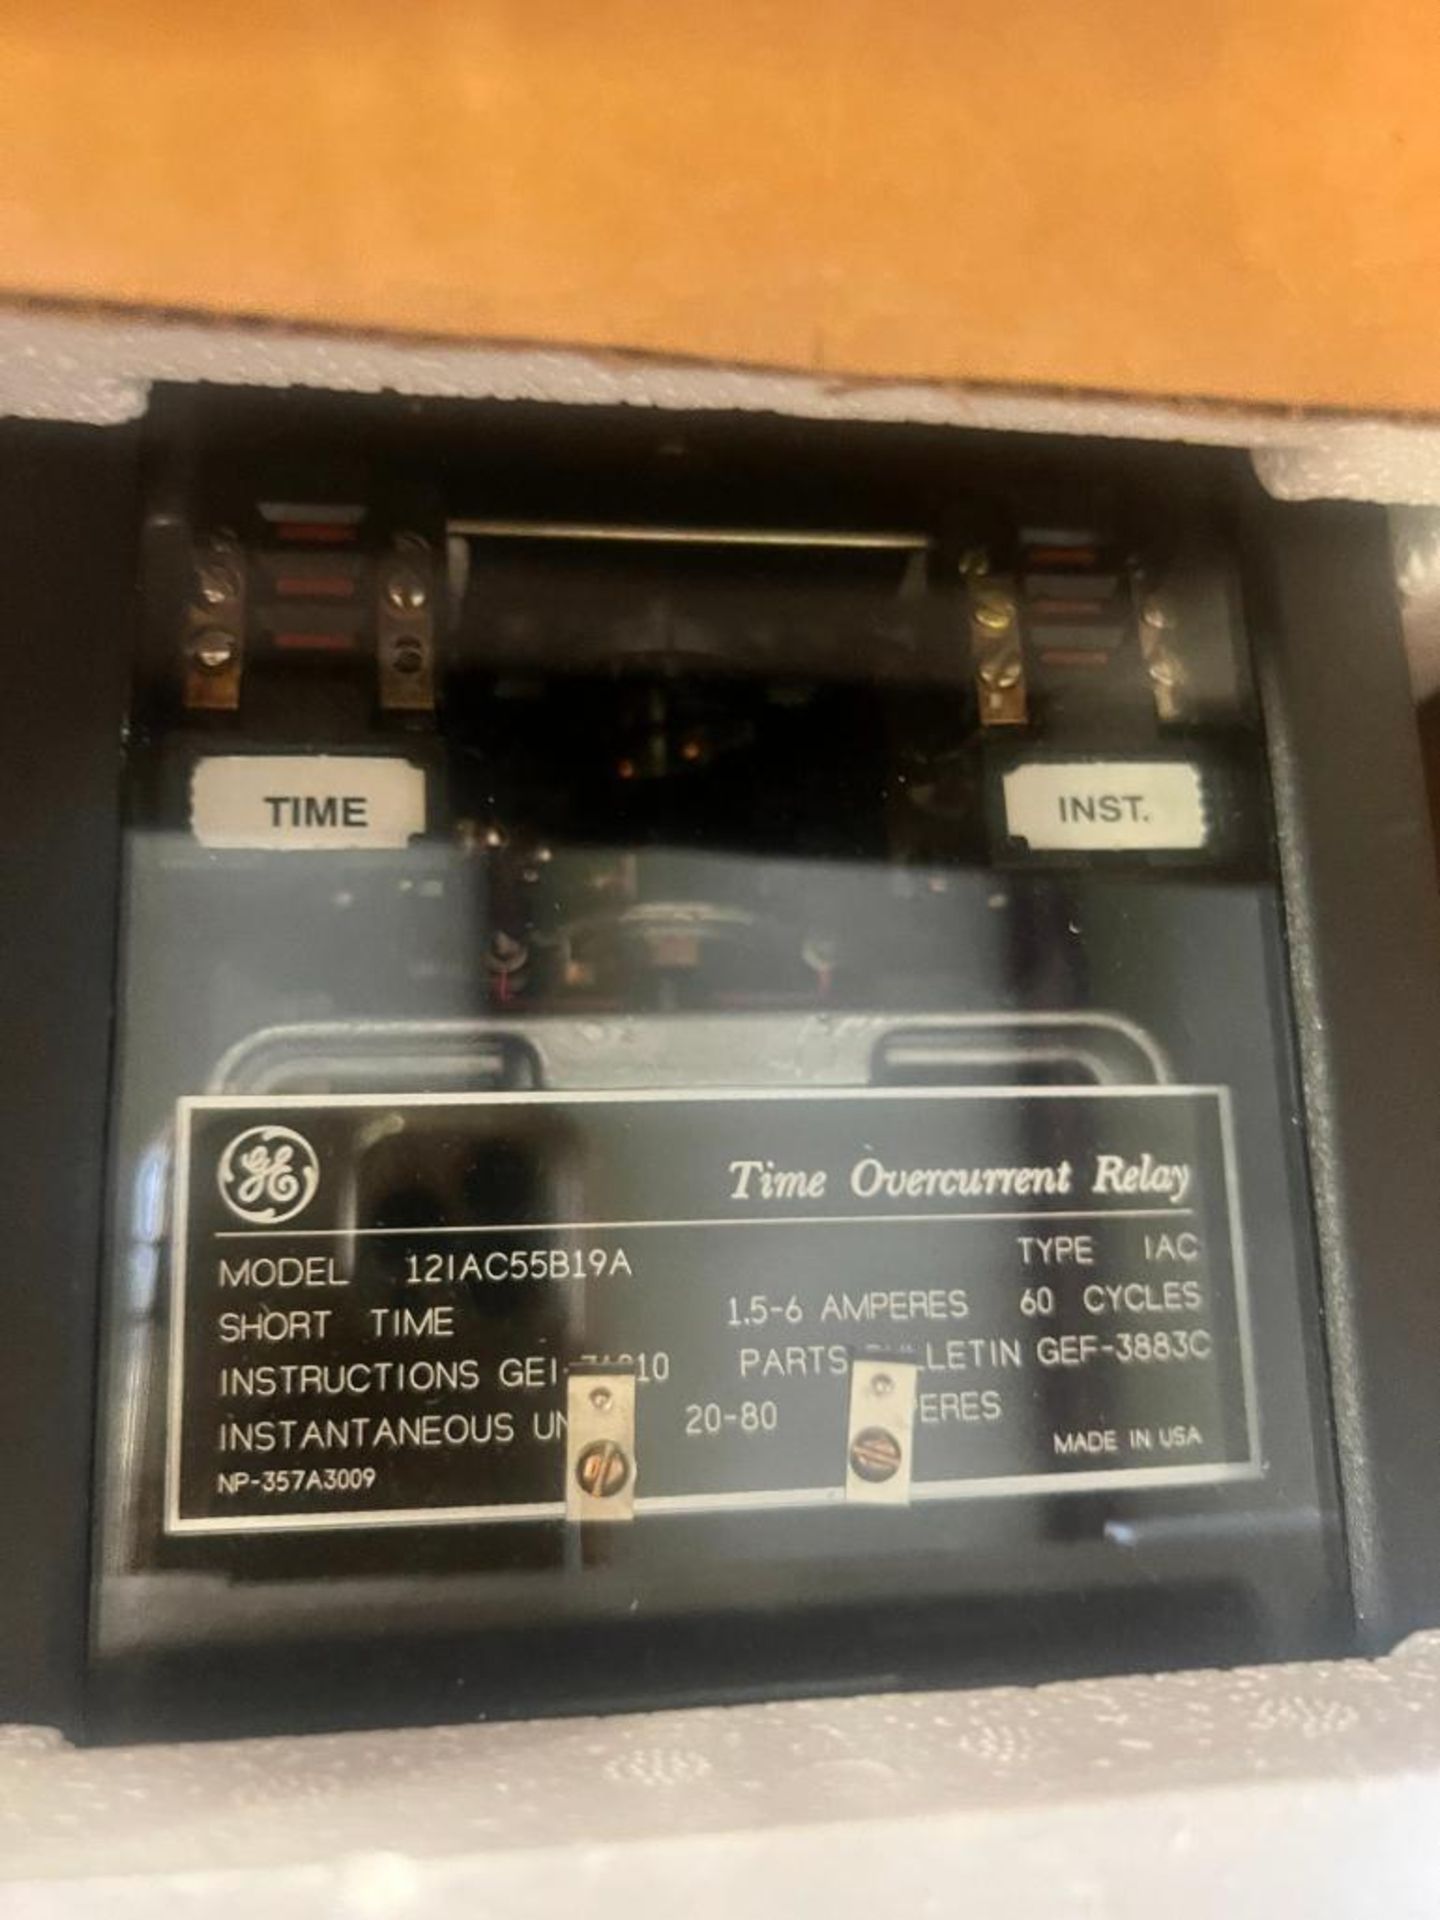 (New) General Electric Time Overcurrent Relay, Model 121AC55B19A